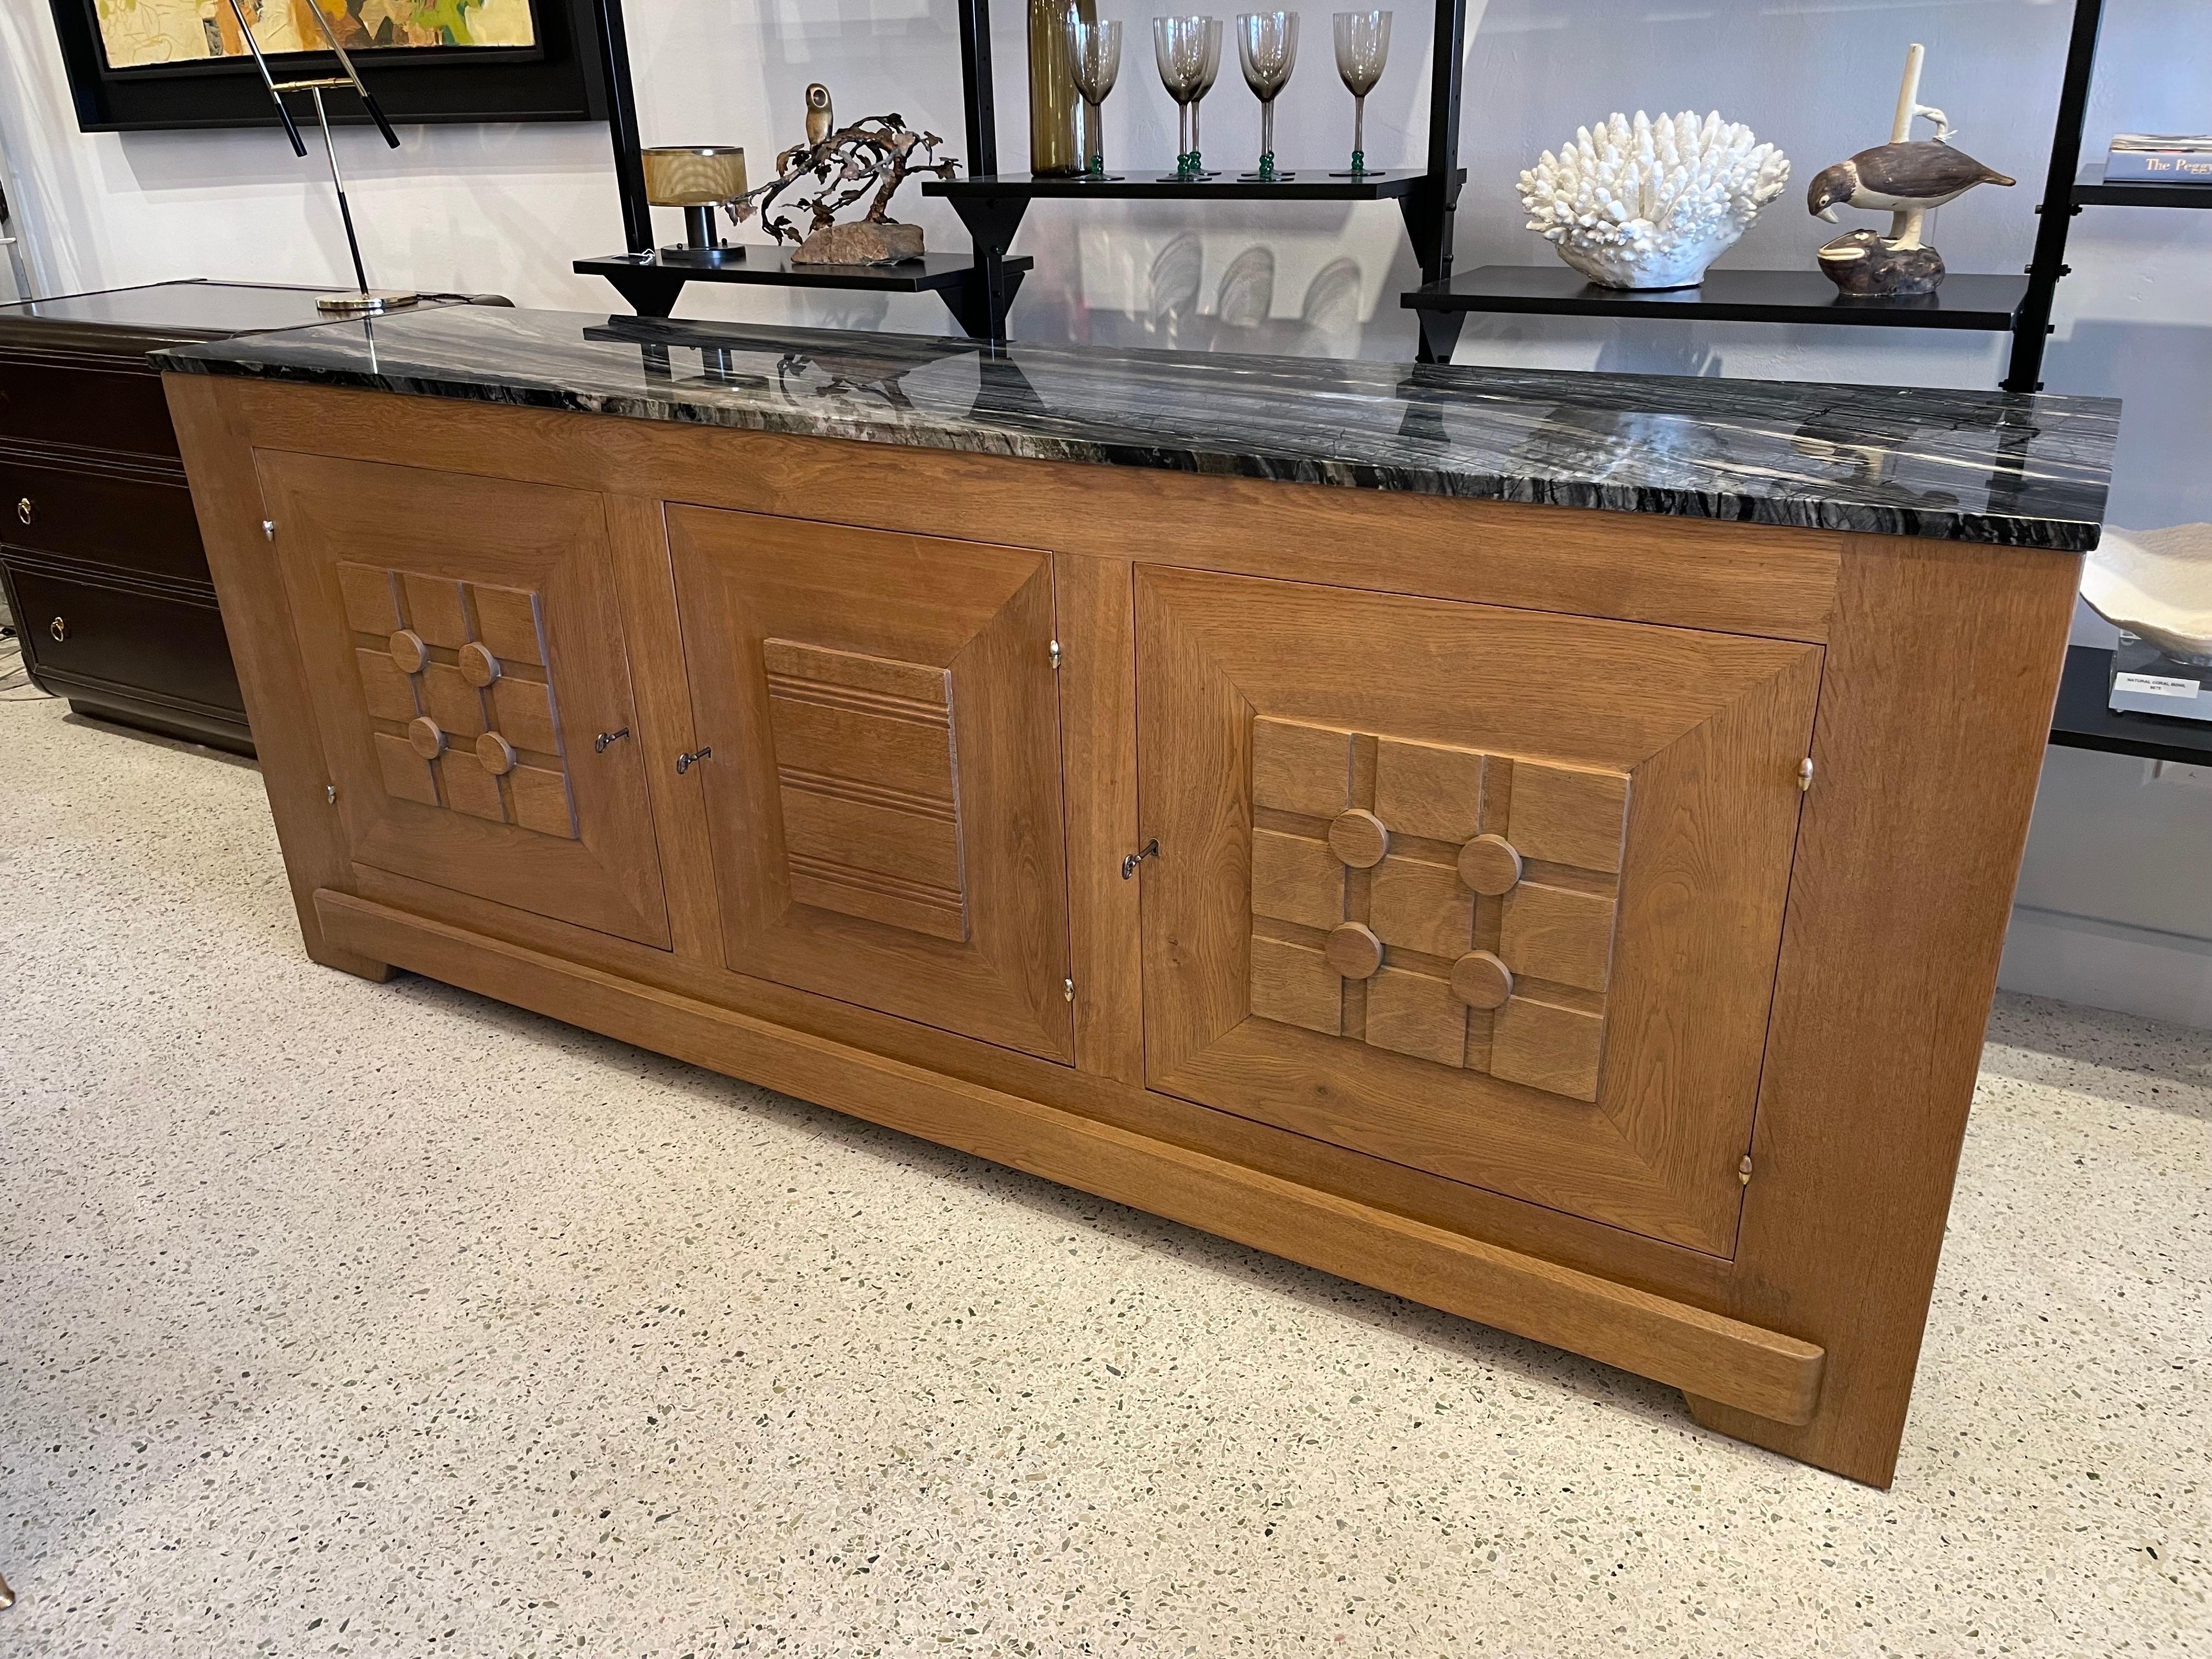 Amazing 3 Door buffet cabinet with carved wood detail ornaments to doors and throughout. Natural French oak with a new Belgian marble to top. Ample shelves and storage, ALL 3 keys work and lock. This is a FIND!.